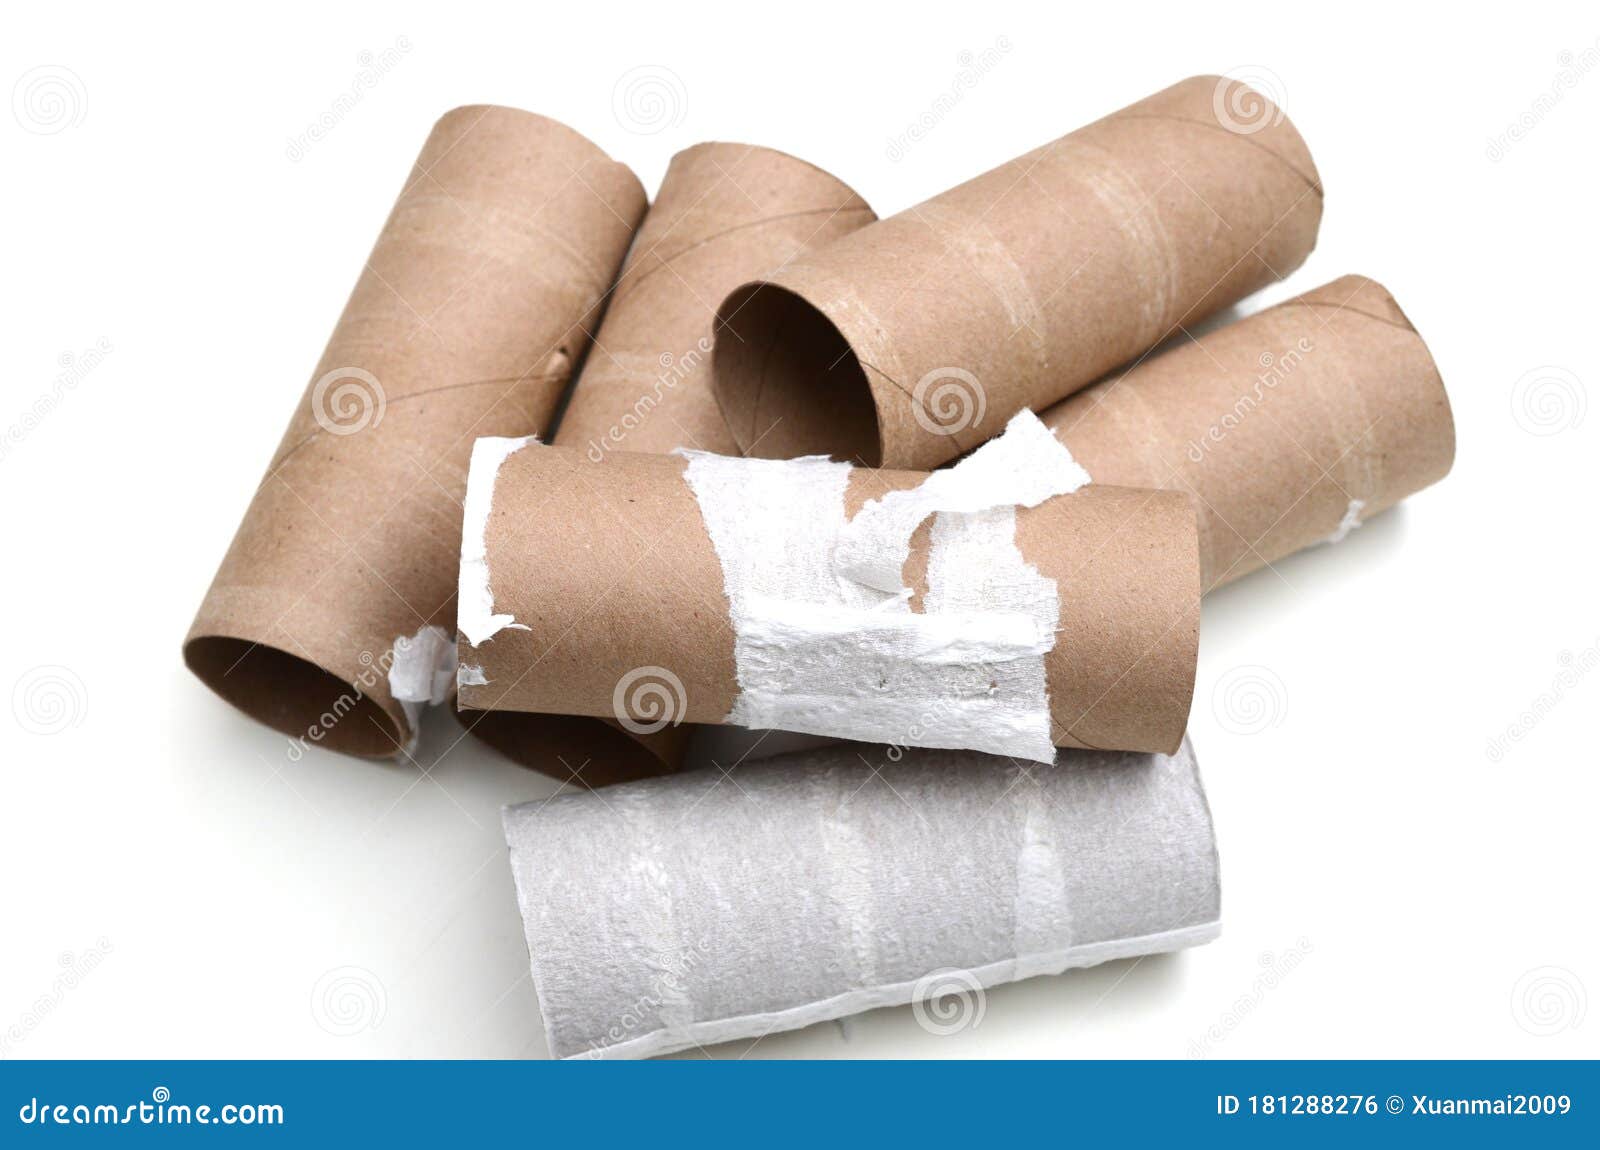 emptiness bath tissues or  toilet paper rolls